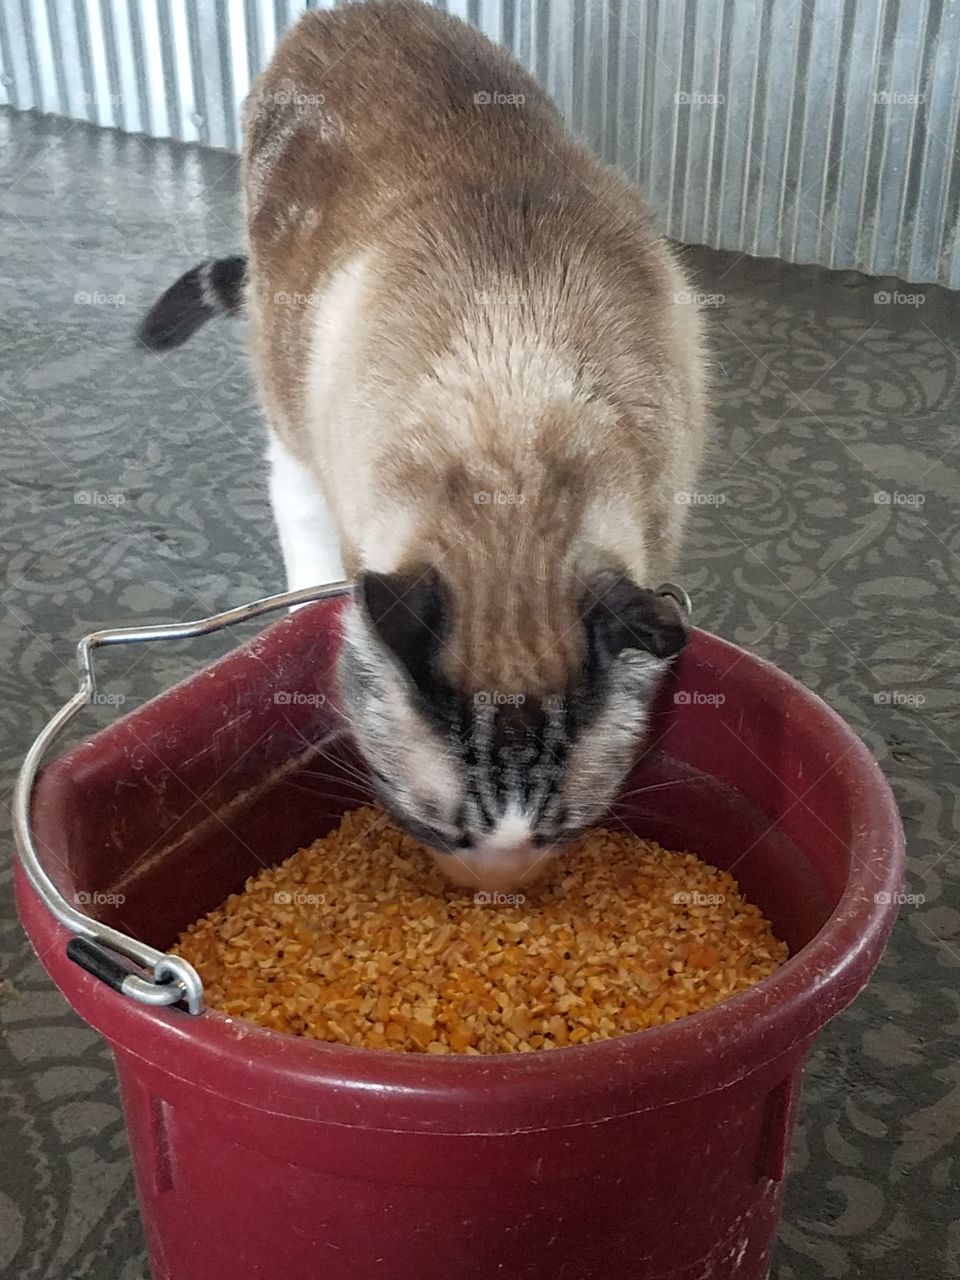 Mokey the cat eating chicken feed